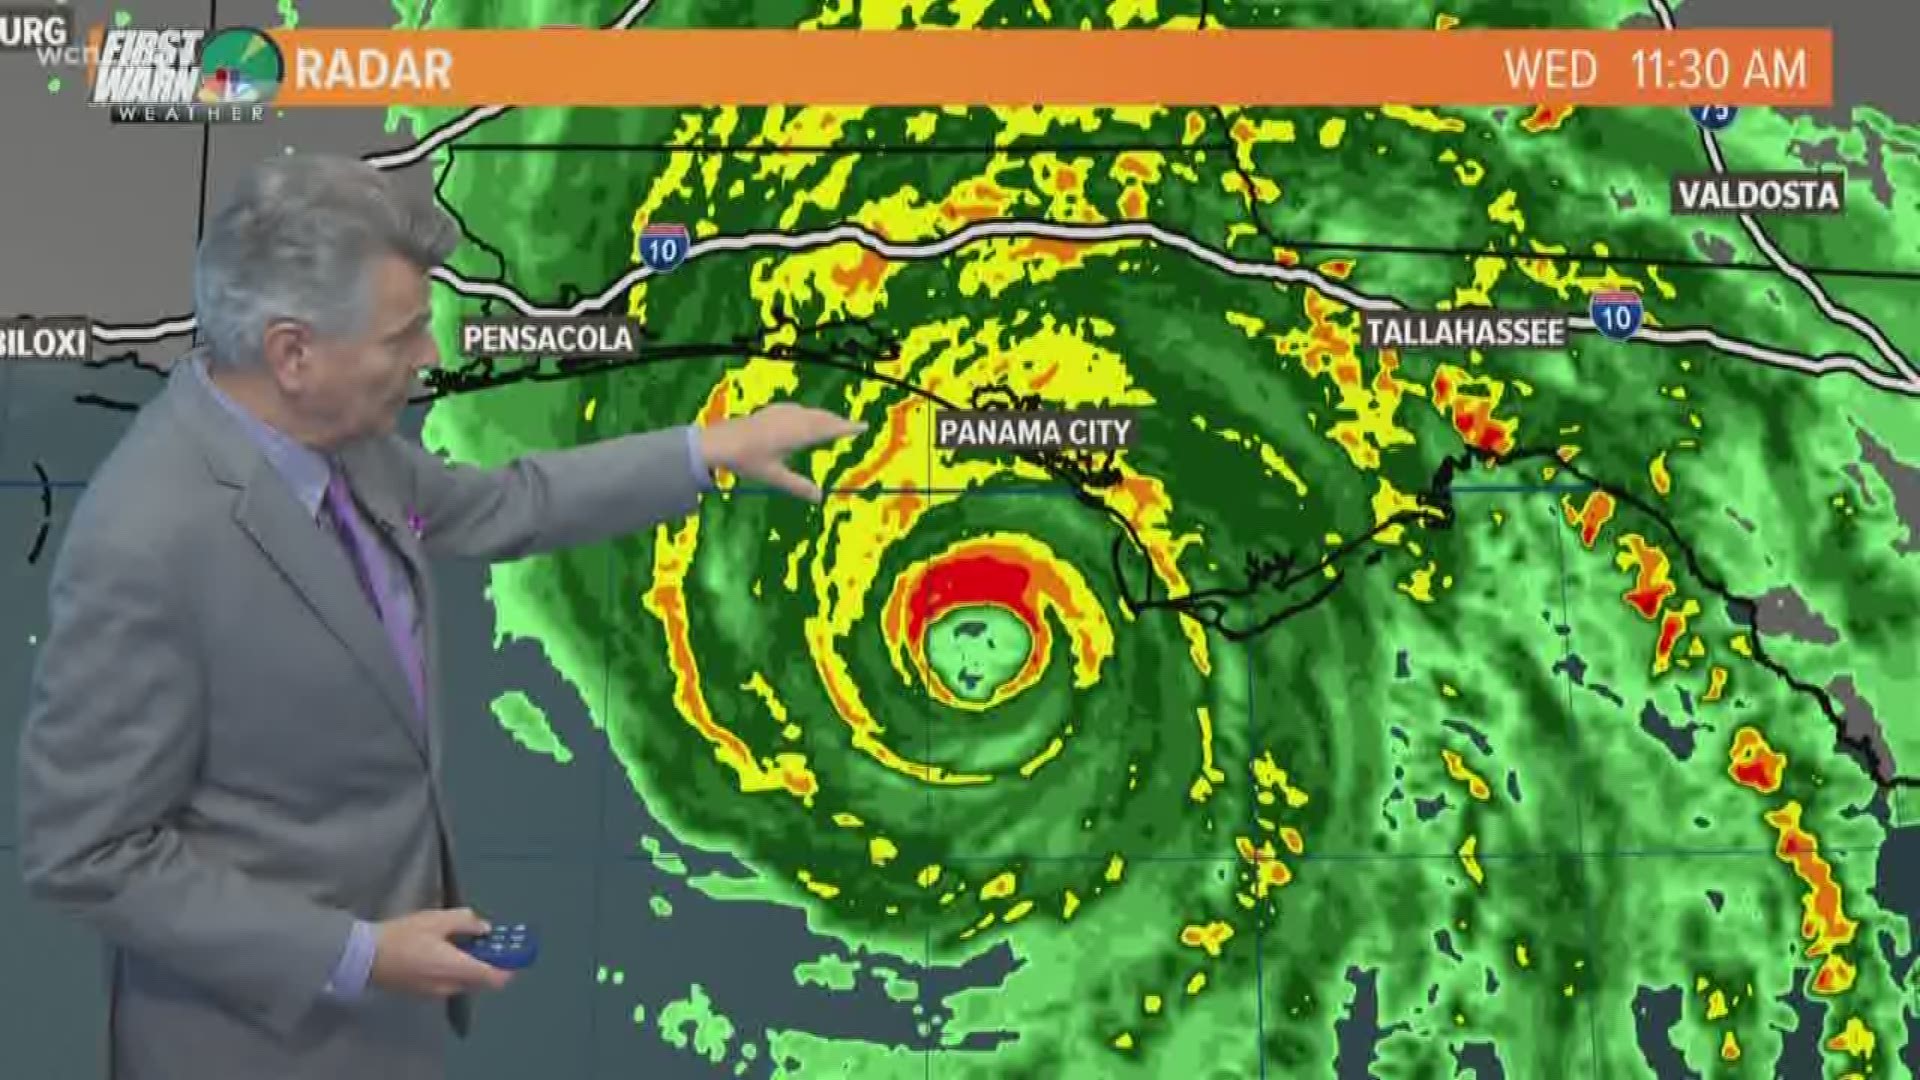 Hurricane Michael's winds are up to 150 mph as the powerful storm churns toward the Gulf Coast of Florida. Catastrophic damage and life-threatening storm surge are expected as the storm makes landfall near Panama City.